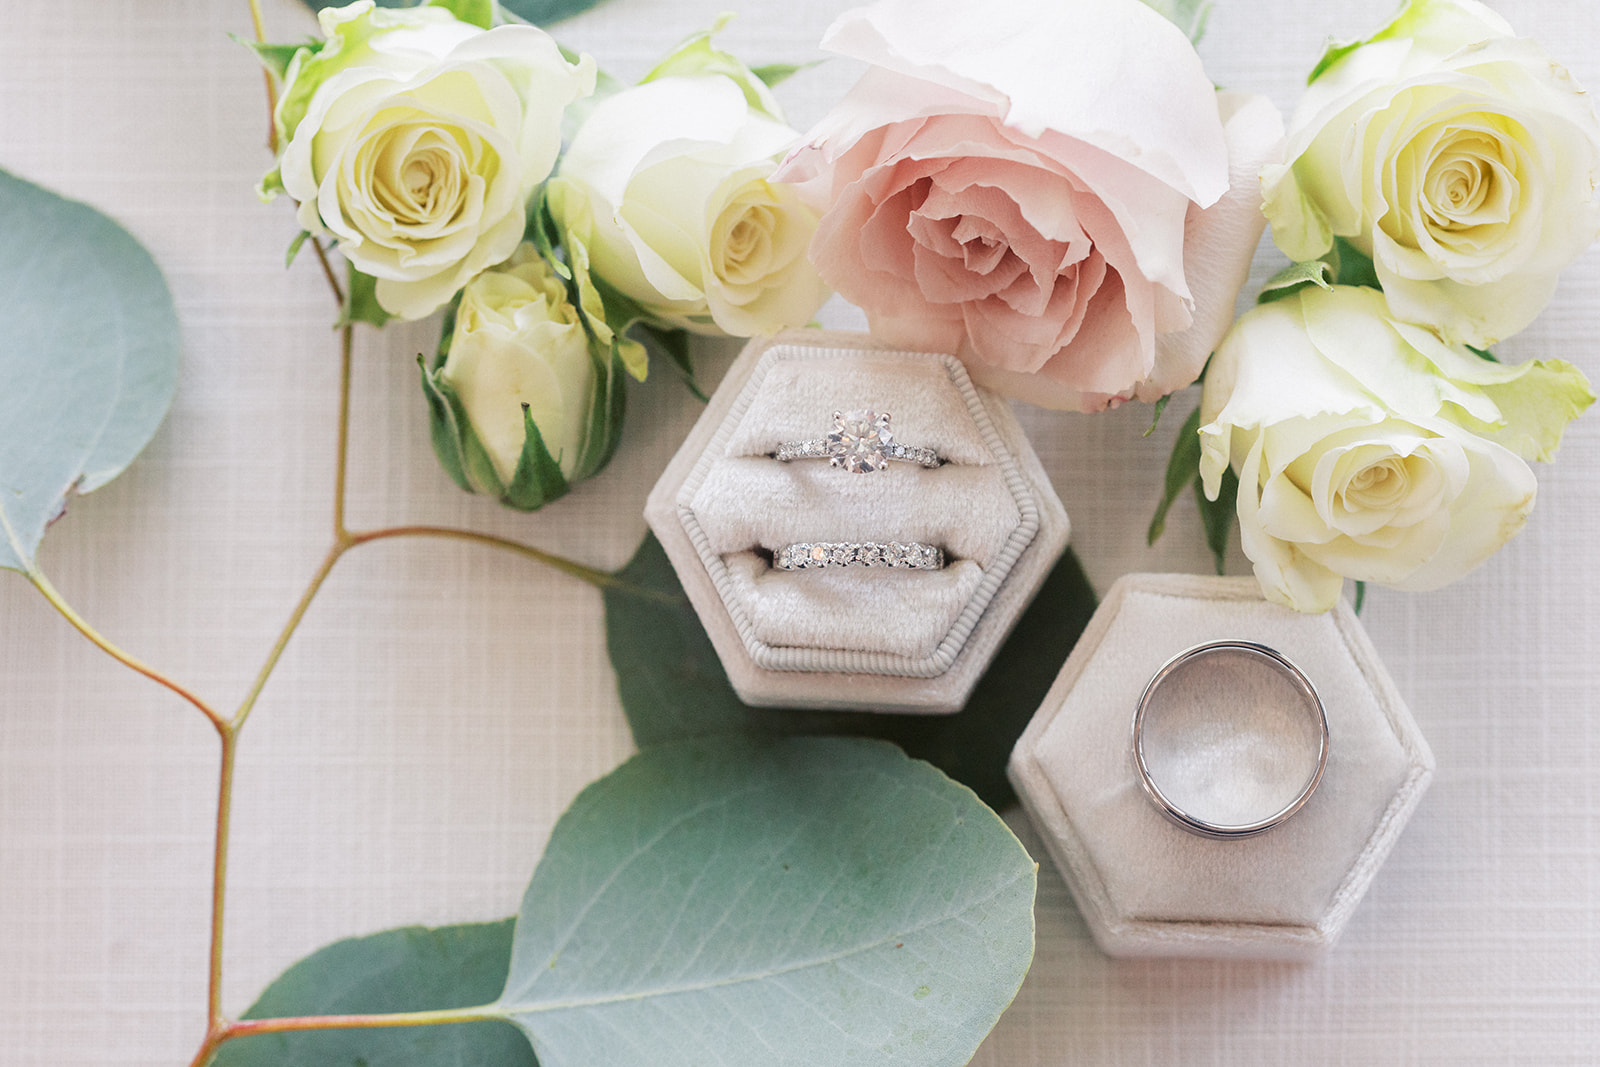 Details of wedding rings on a ring box with roses